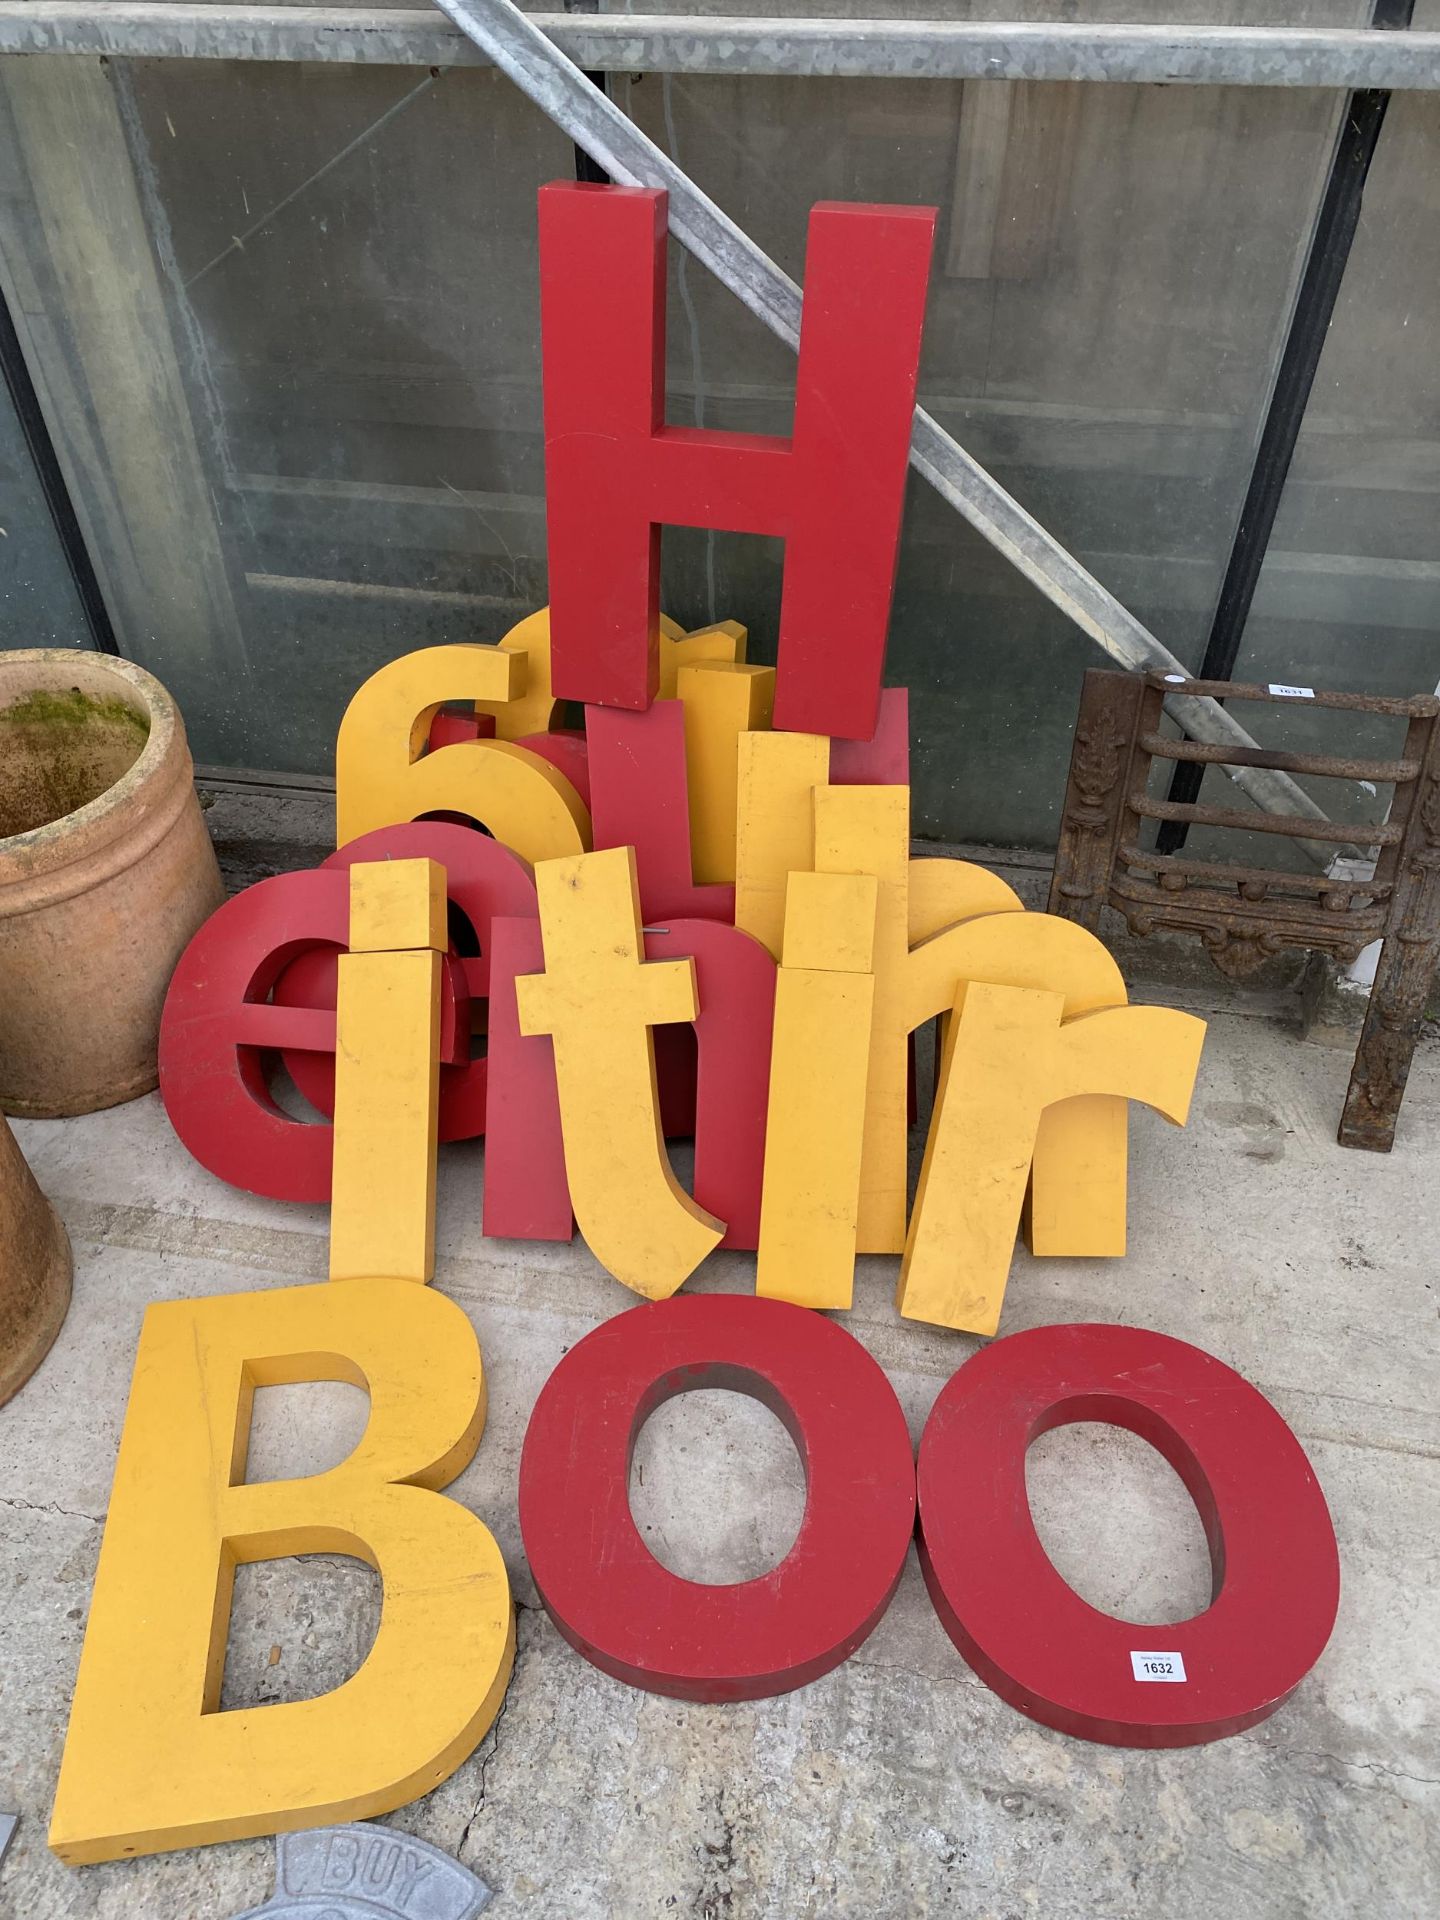 A LARGE ASSORTMENT OF METAL SIGN MAKING LETTERS